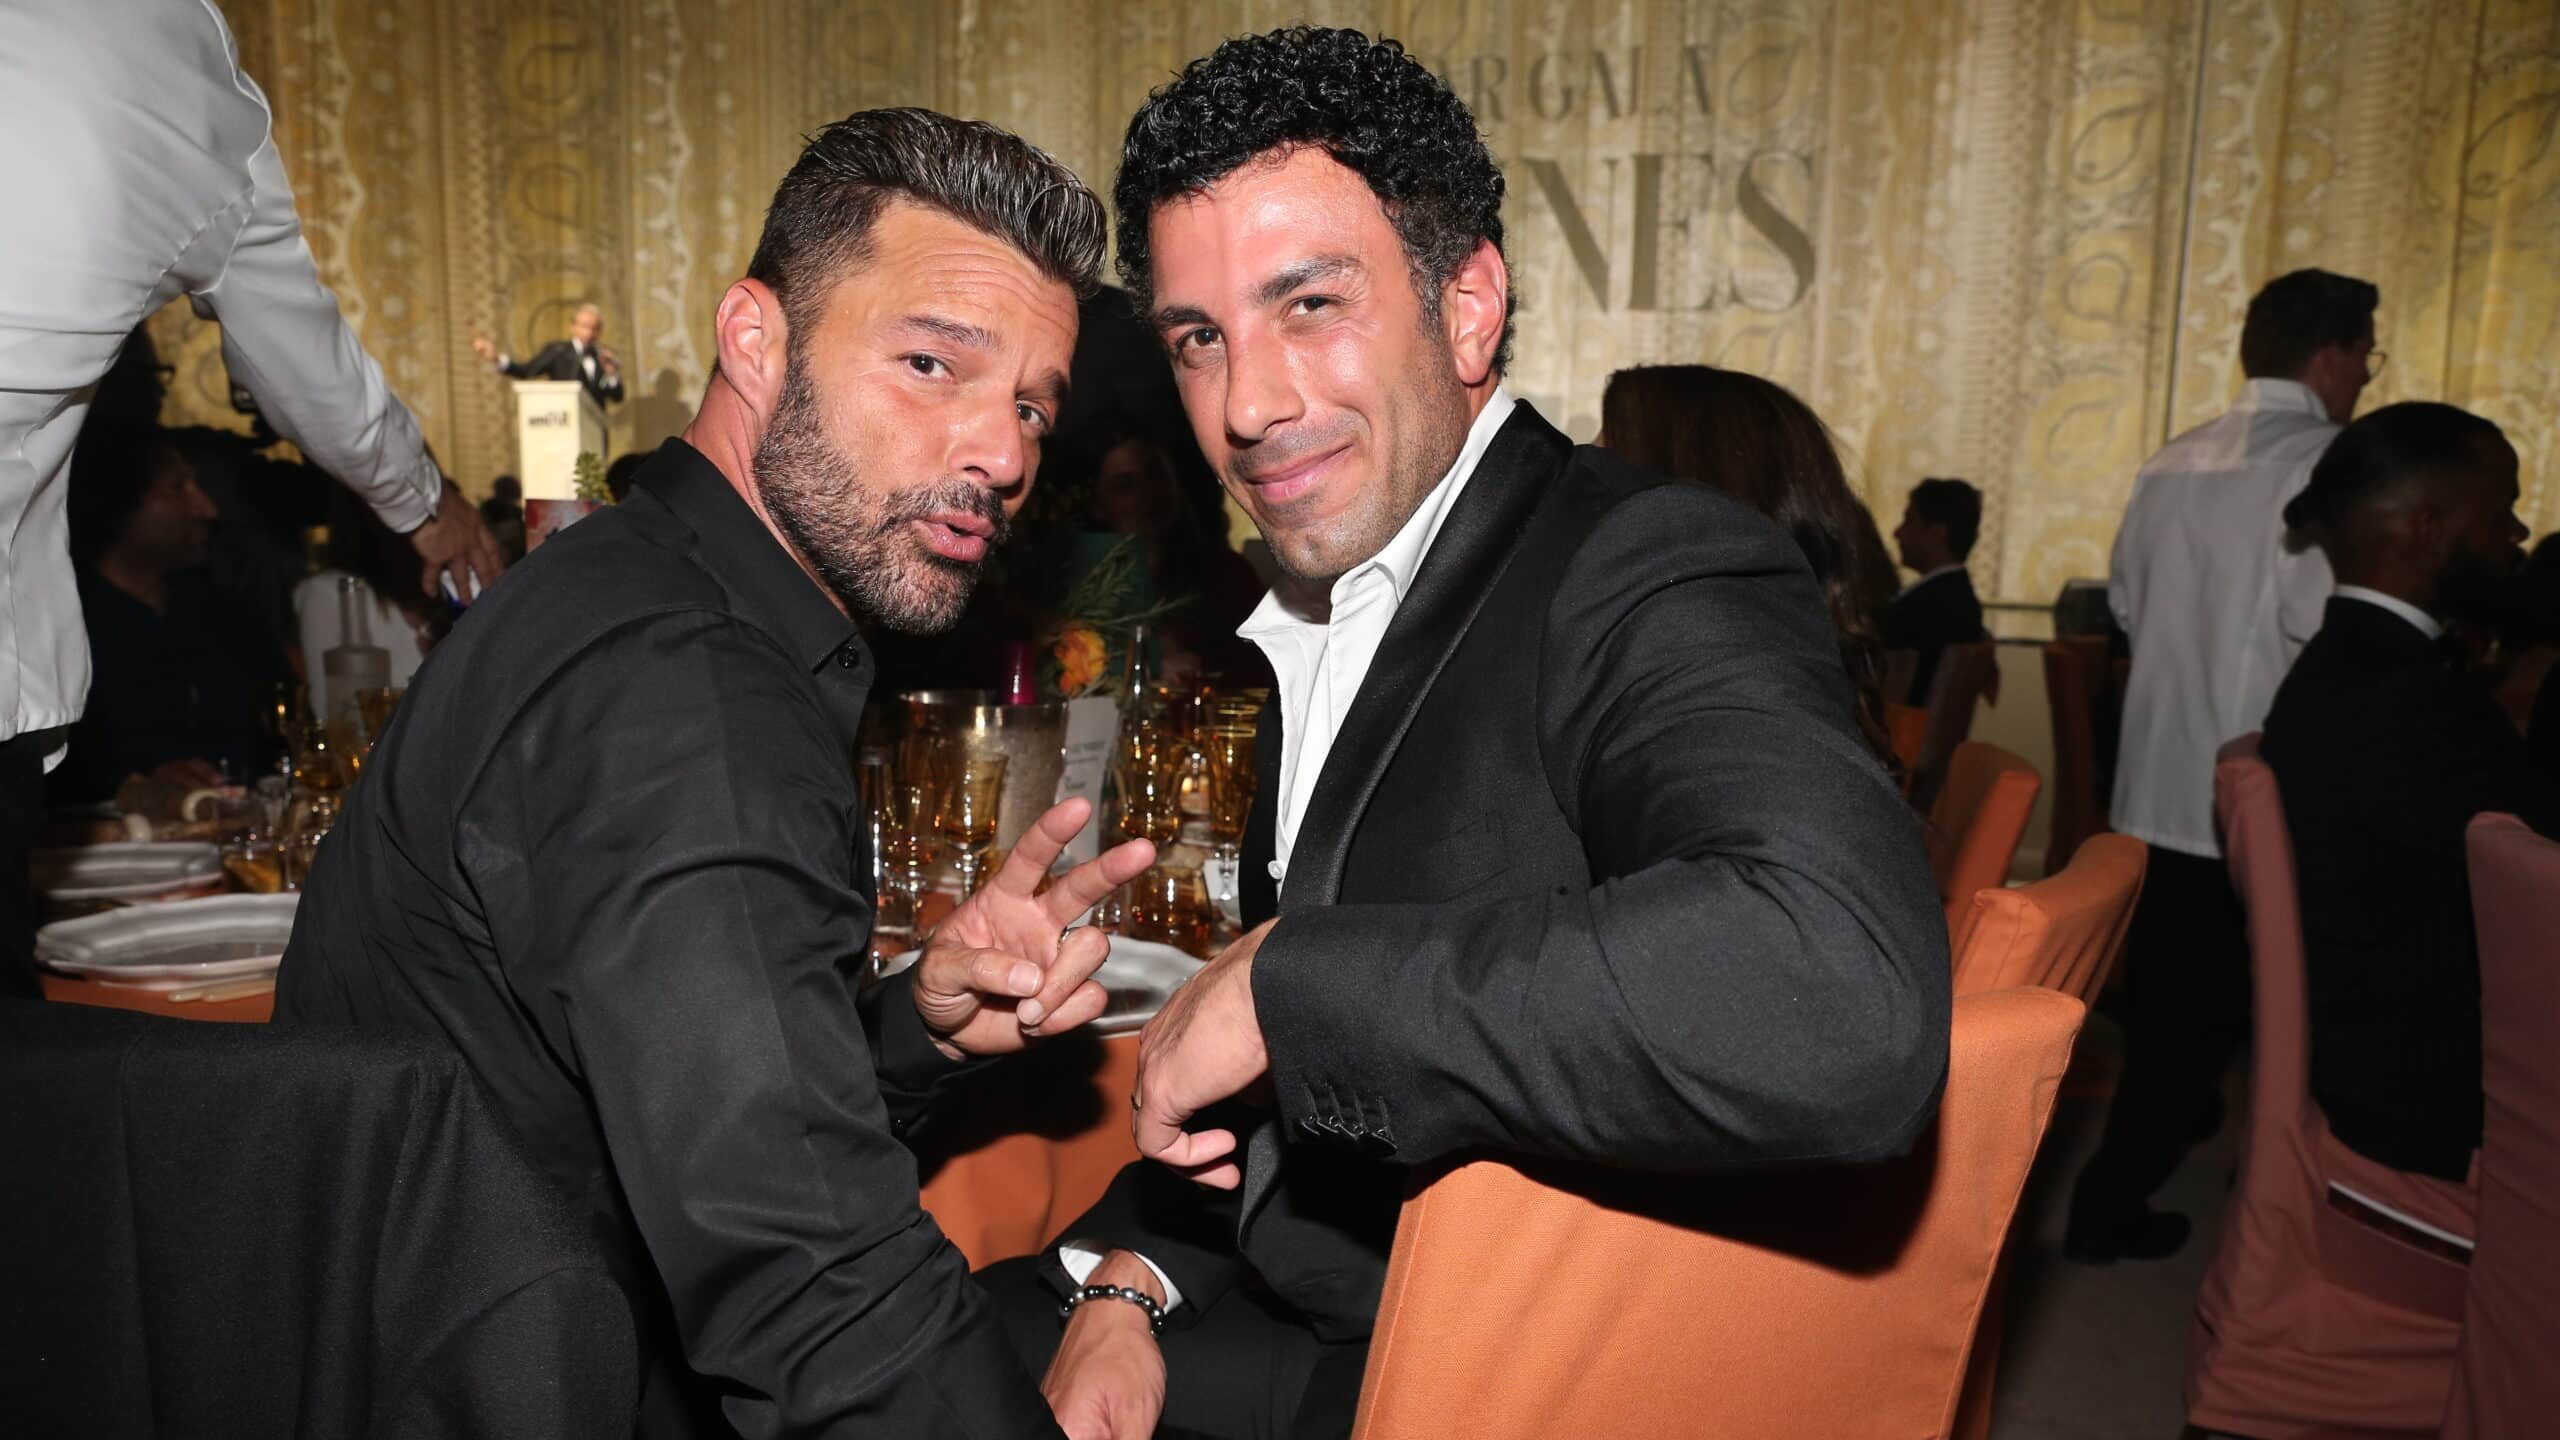 Ricky Martin and Jwan Yosef attend the amfAR Cannes Gala 2022 at Hotel du Cap-Eden-Roc on May 26, 2022 in Cap d'Antibes, France.